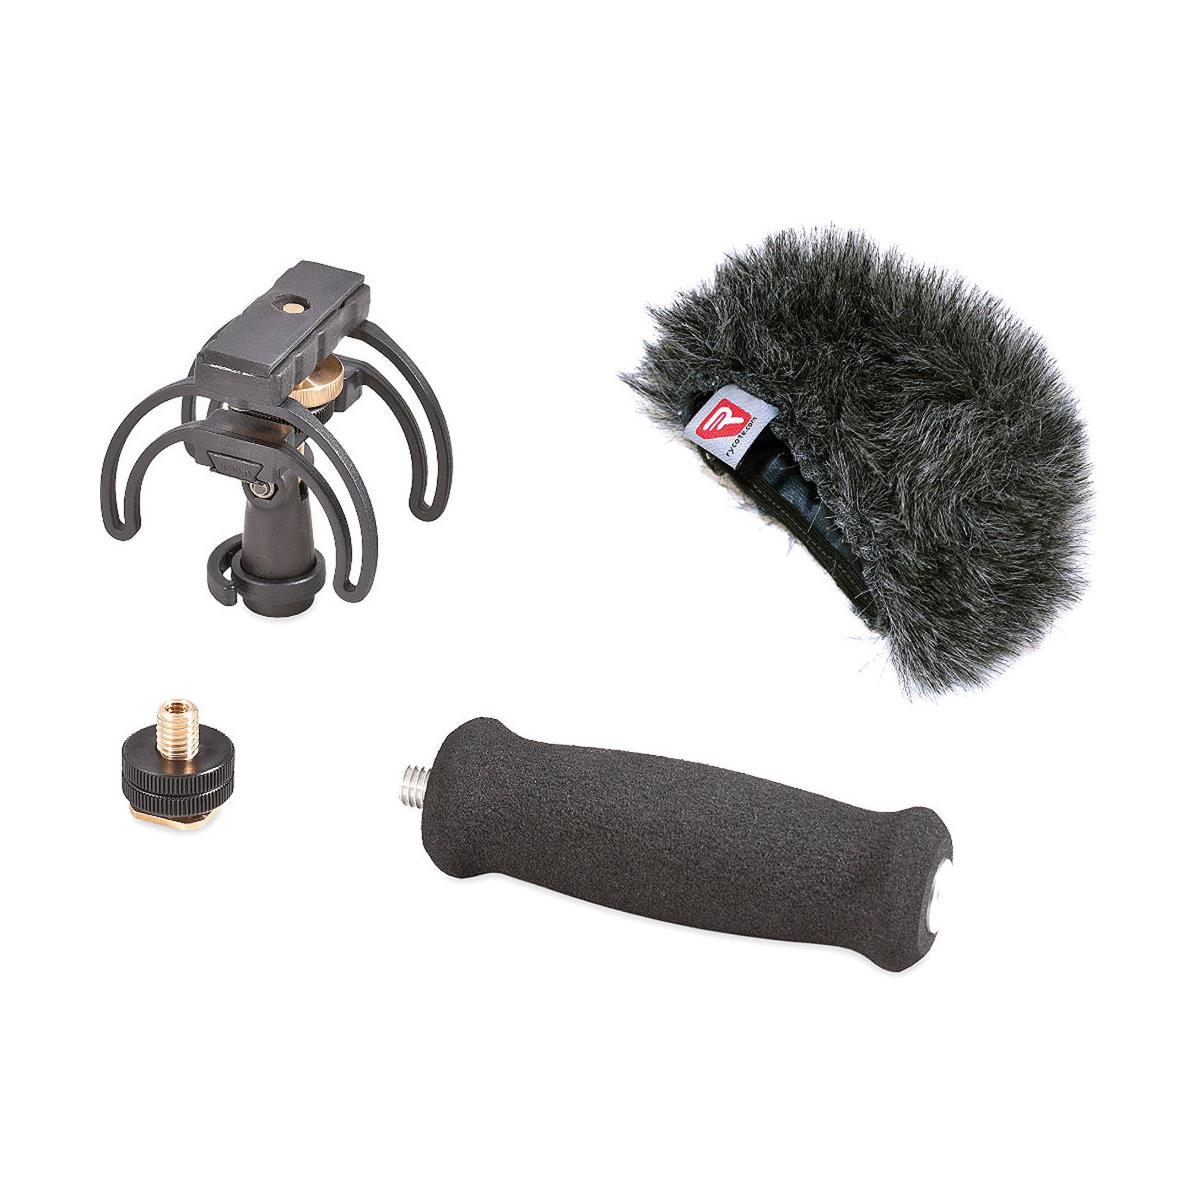 Image of Rycote Recorder Audio Kit for Tascam DR-100/DR-100 MKII Recorder